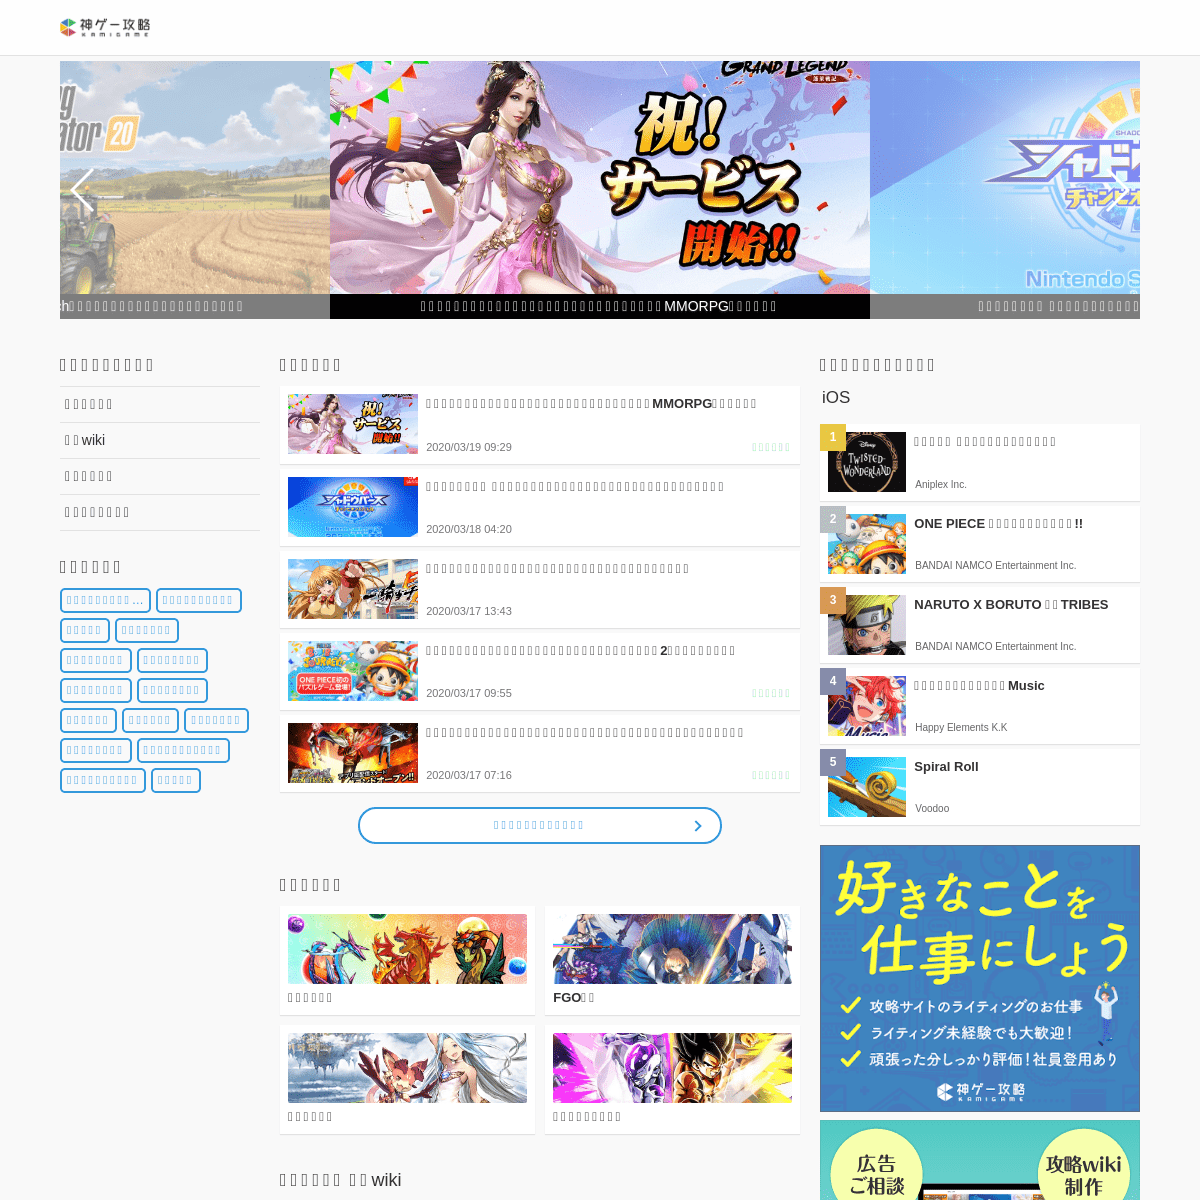 A complete backup of kamigame.jp